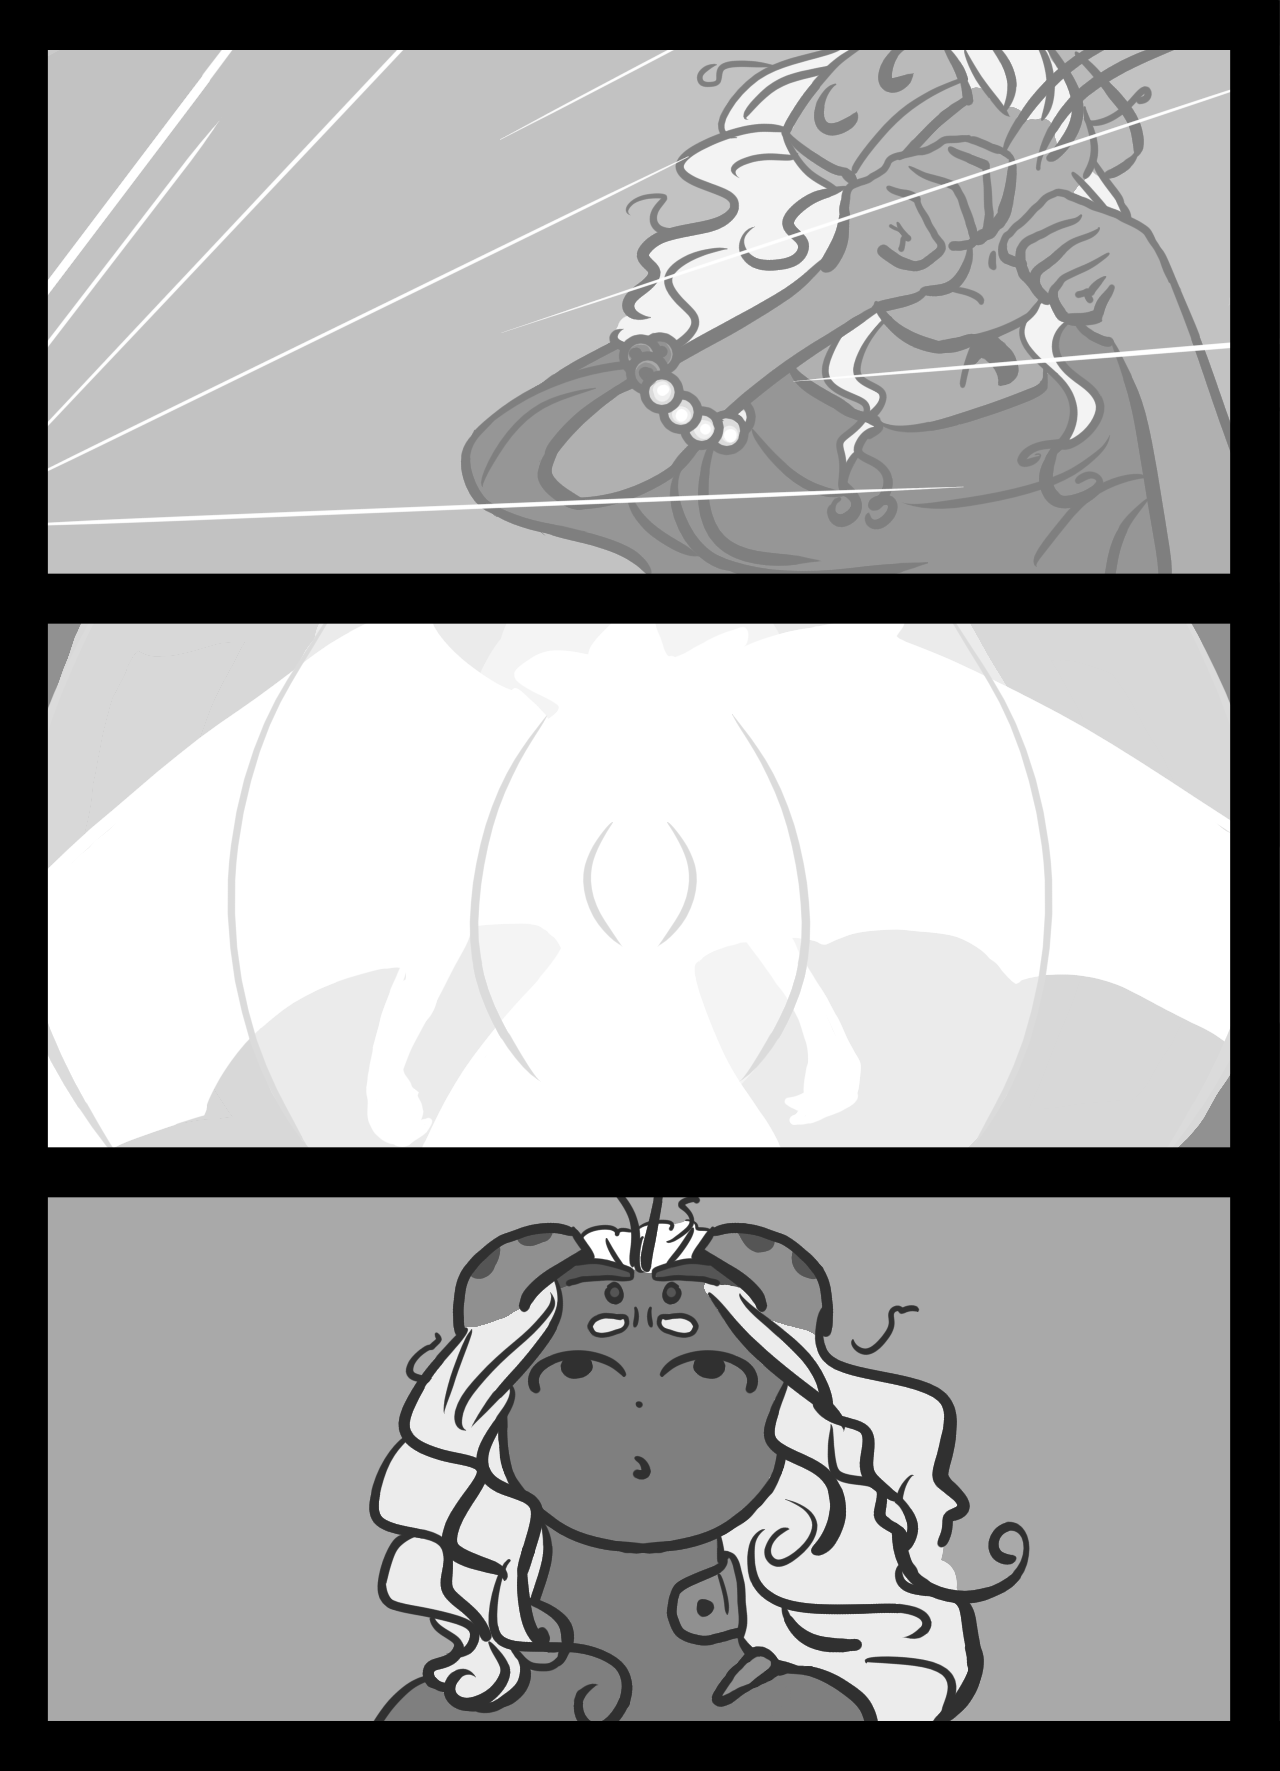 Page 25: An alien girl covers her eyes as the room fills with light. She looks up in surprise after the light fades.